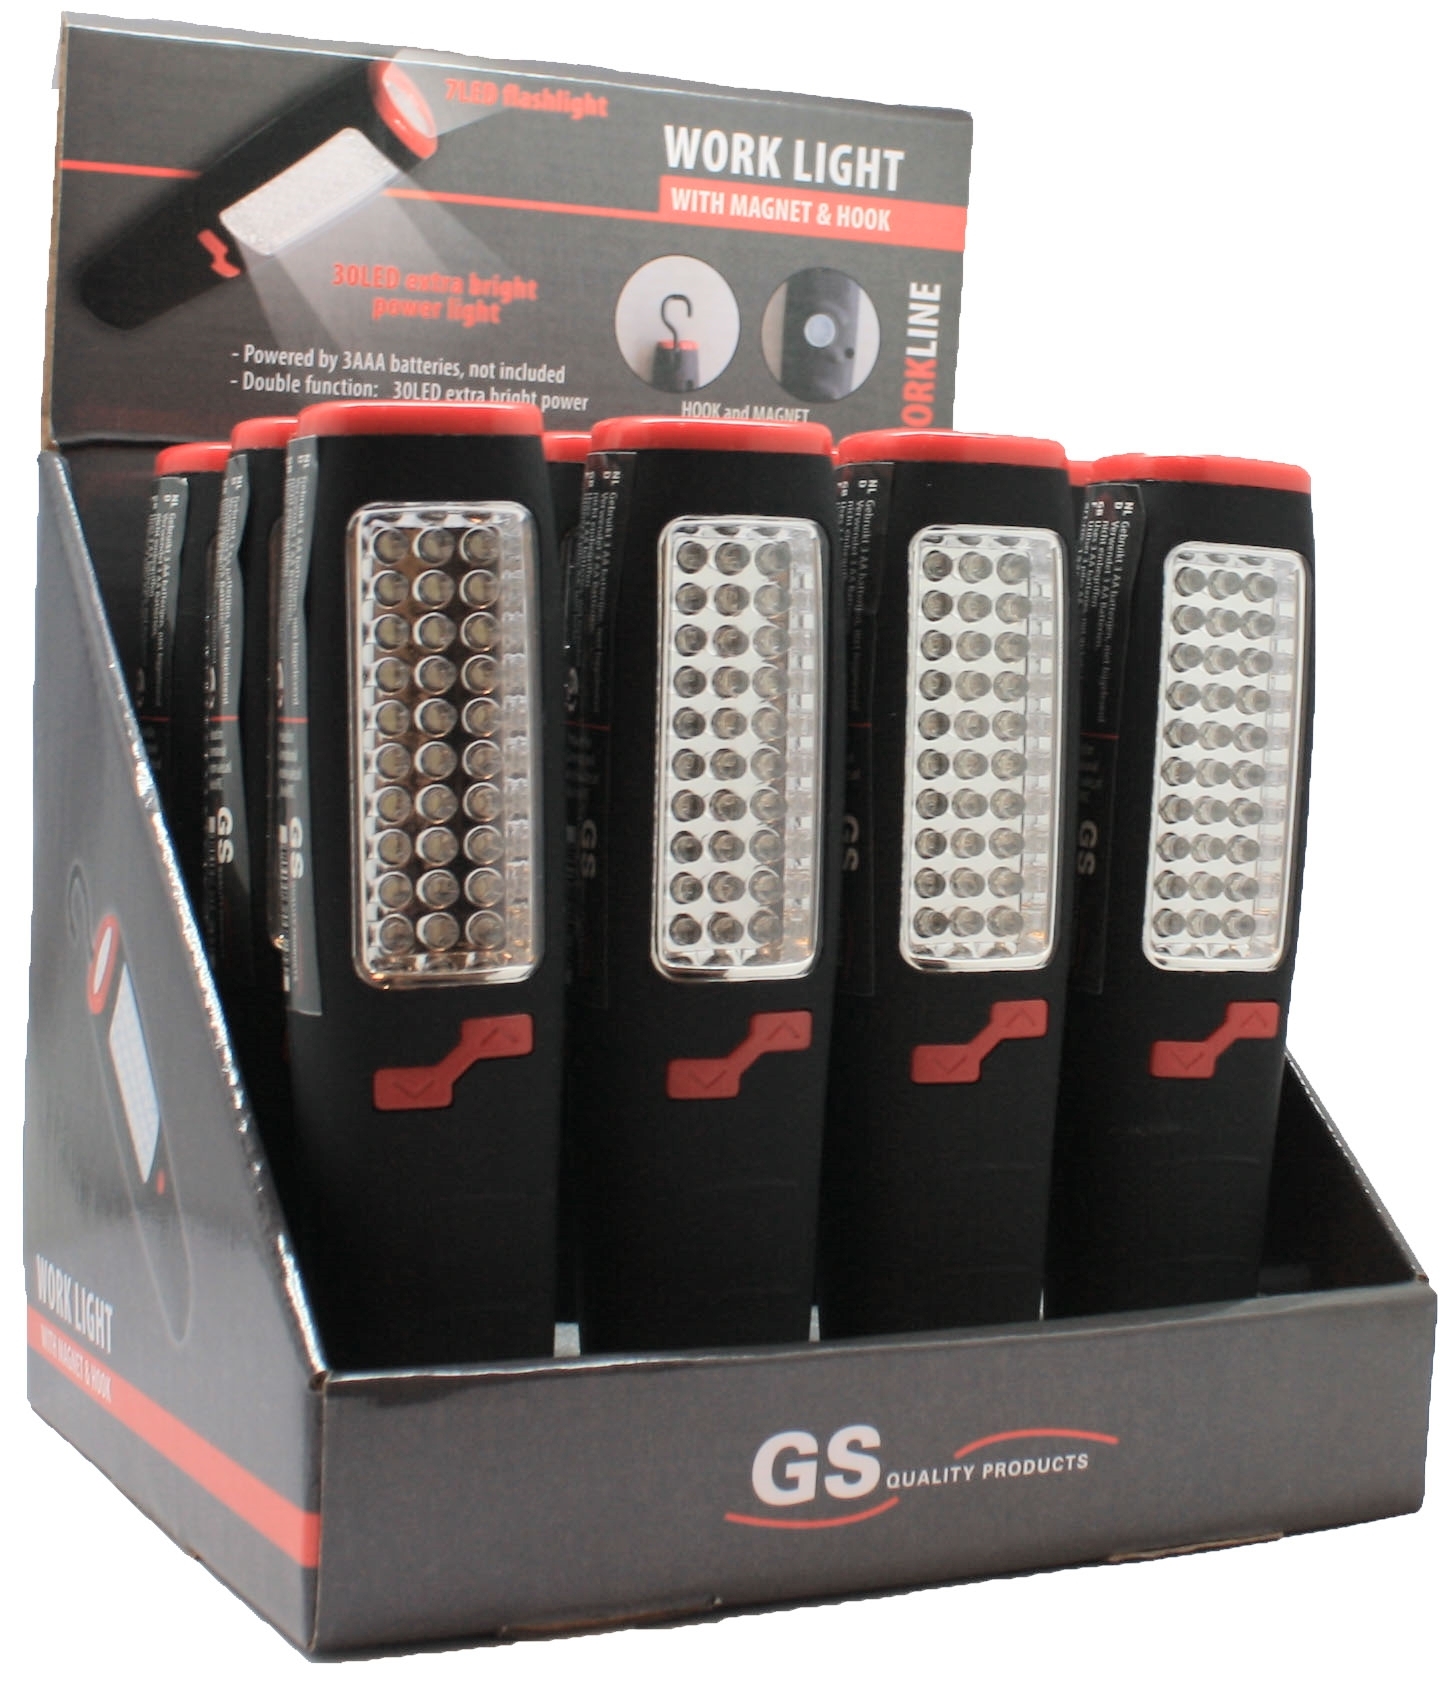 GS Quality Products Werklamp 3 in 1 LED - work light - zaklamp - campinglamp - Rood